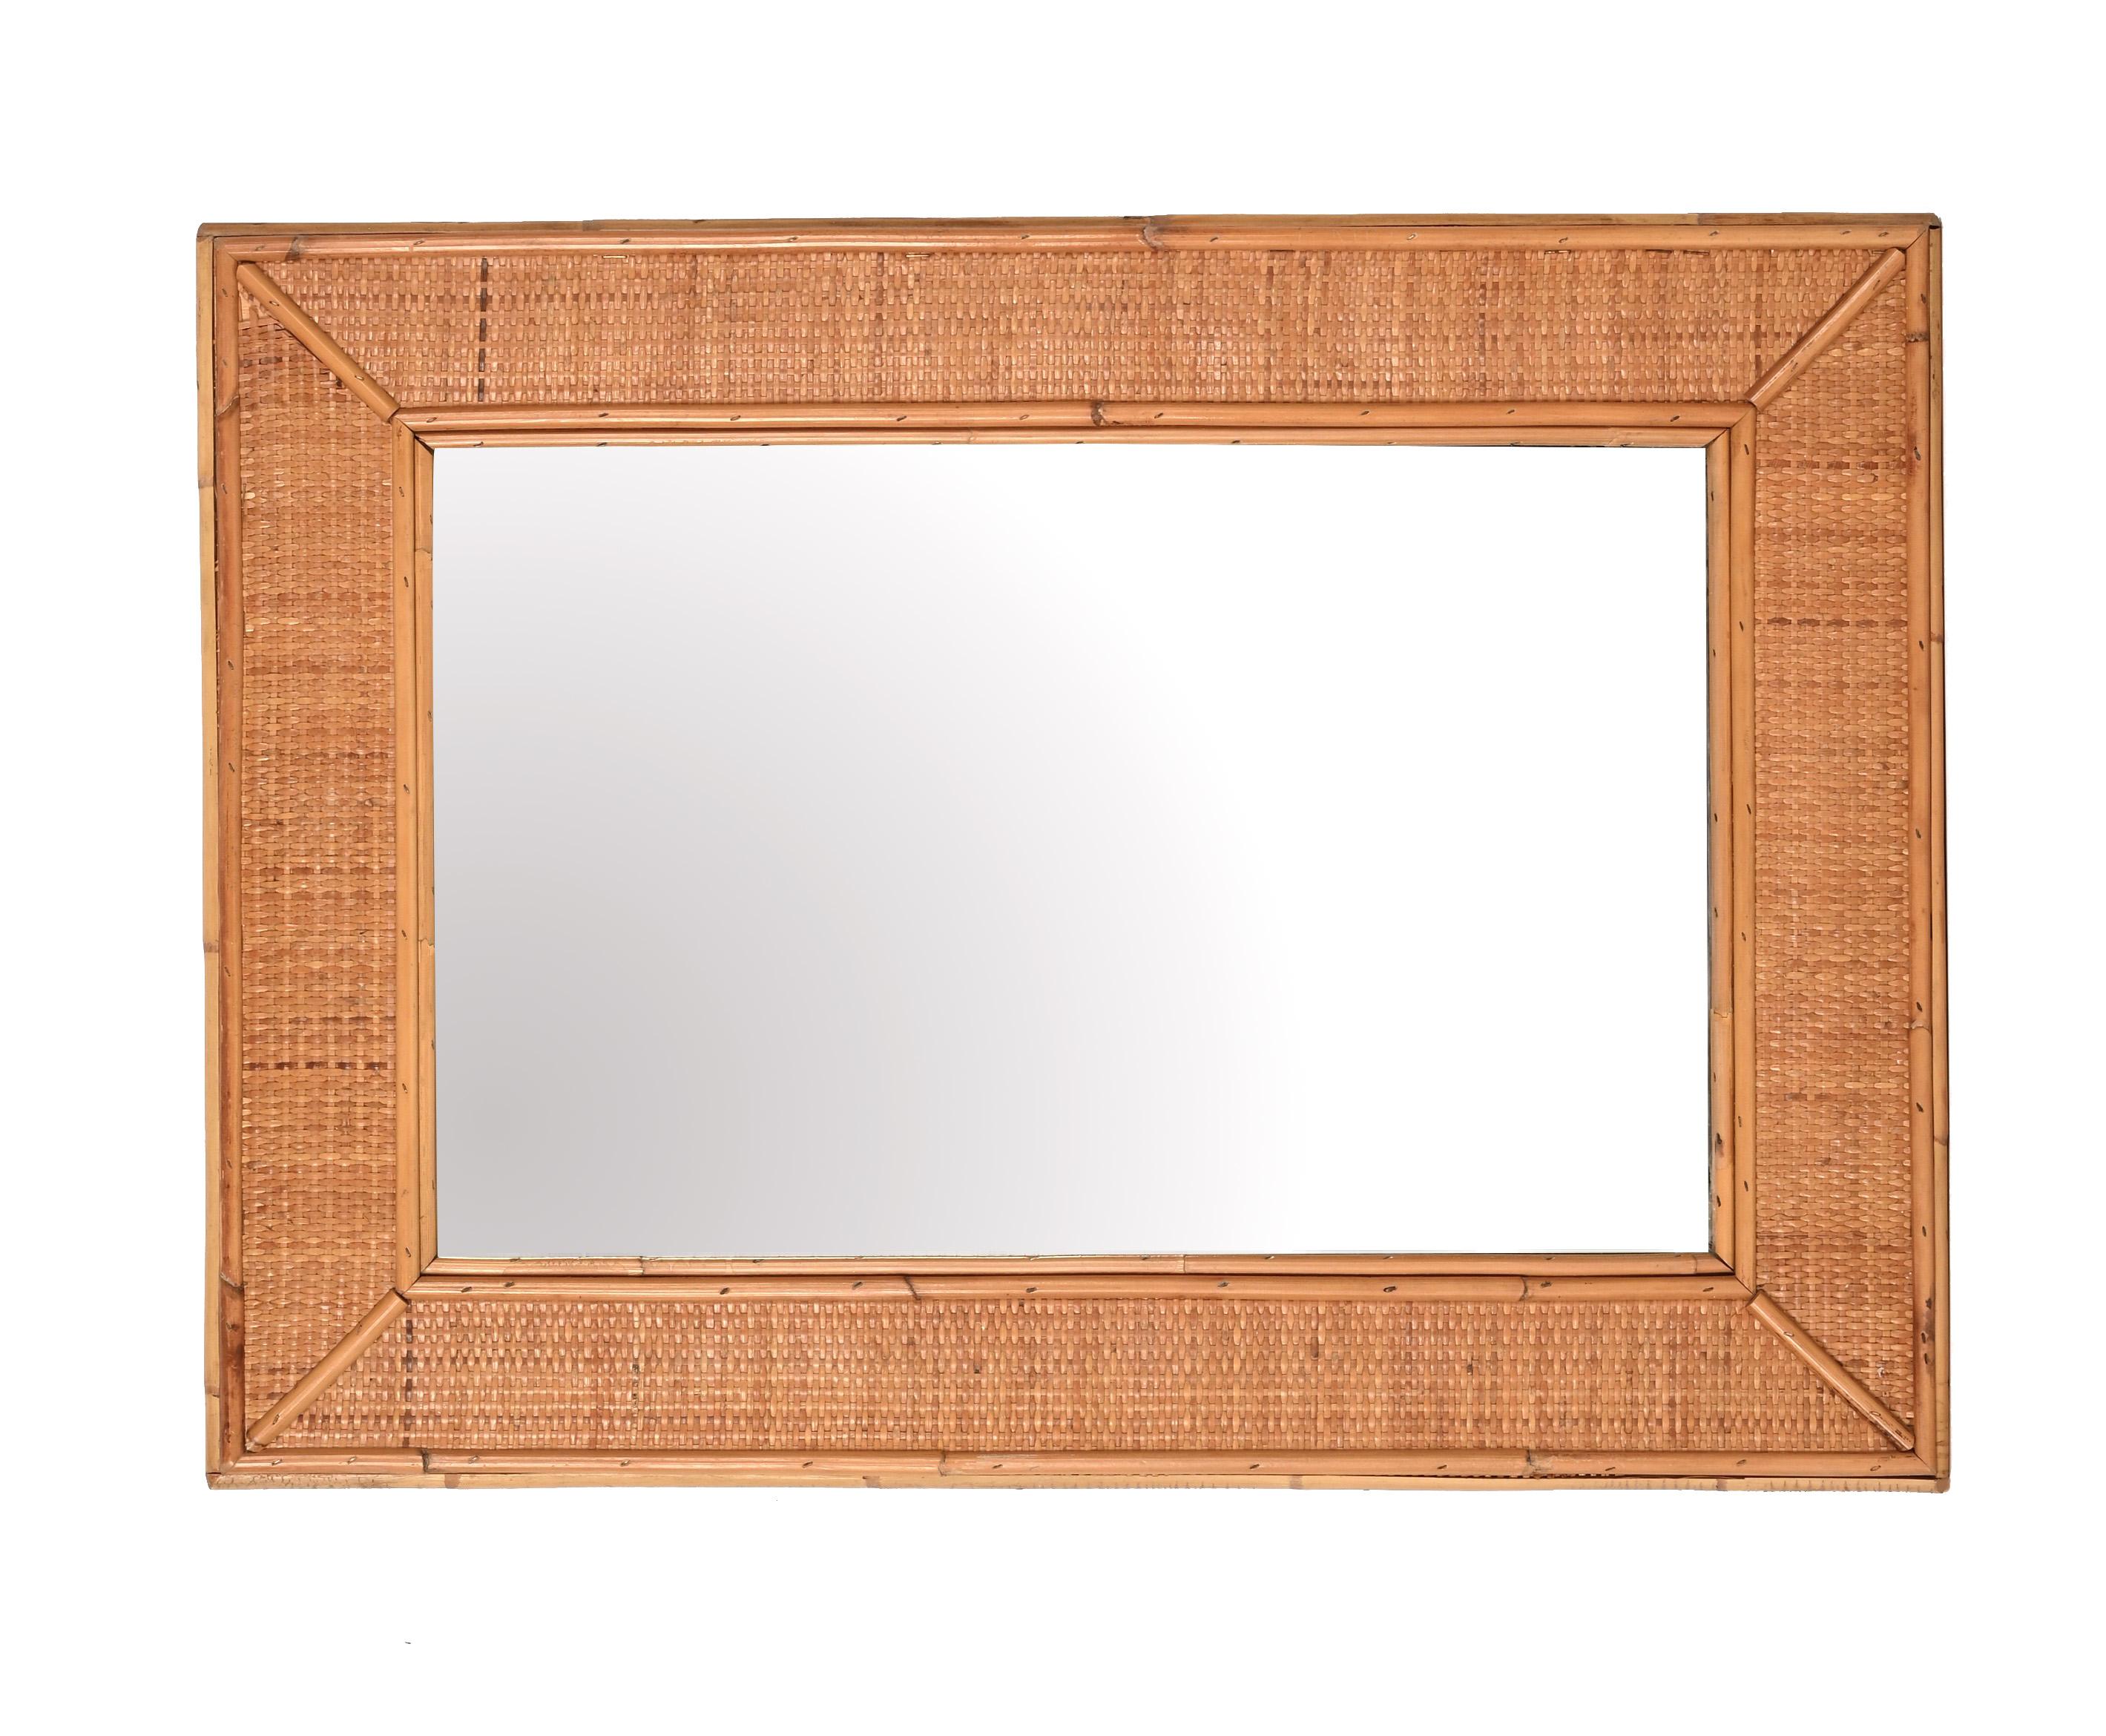 Midcentury Rectangular Italian Mirror with Bamboo and Woven Wicker Frame, 1970s For Sale 6